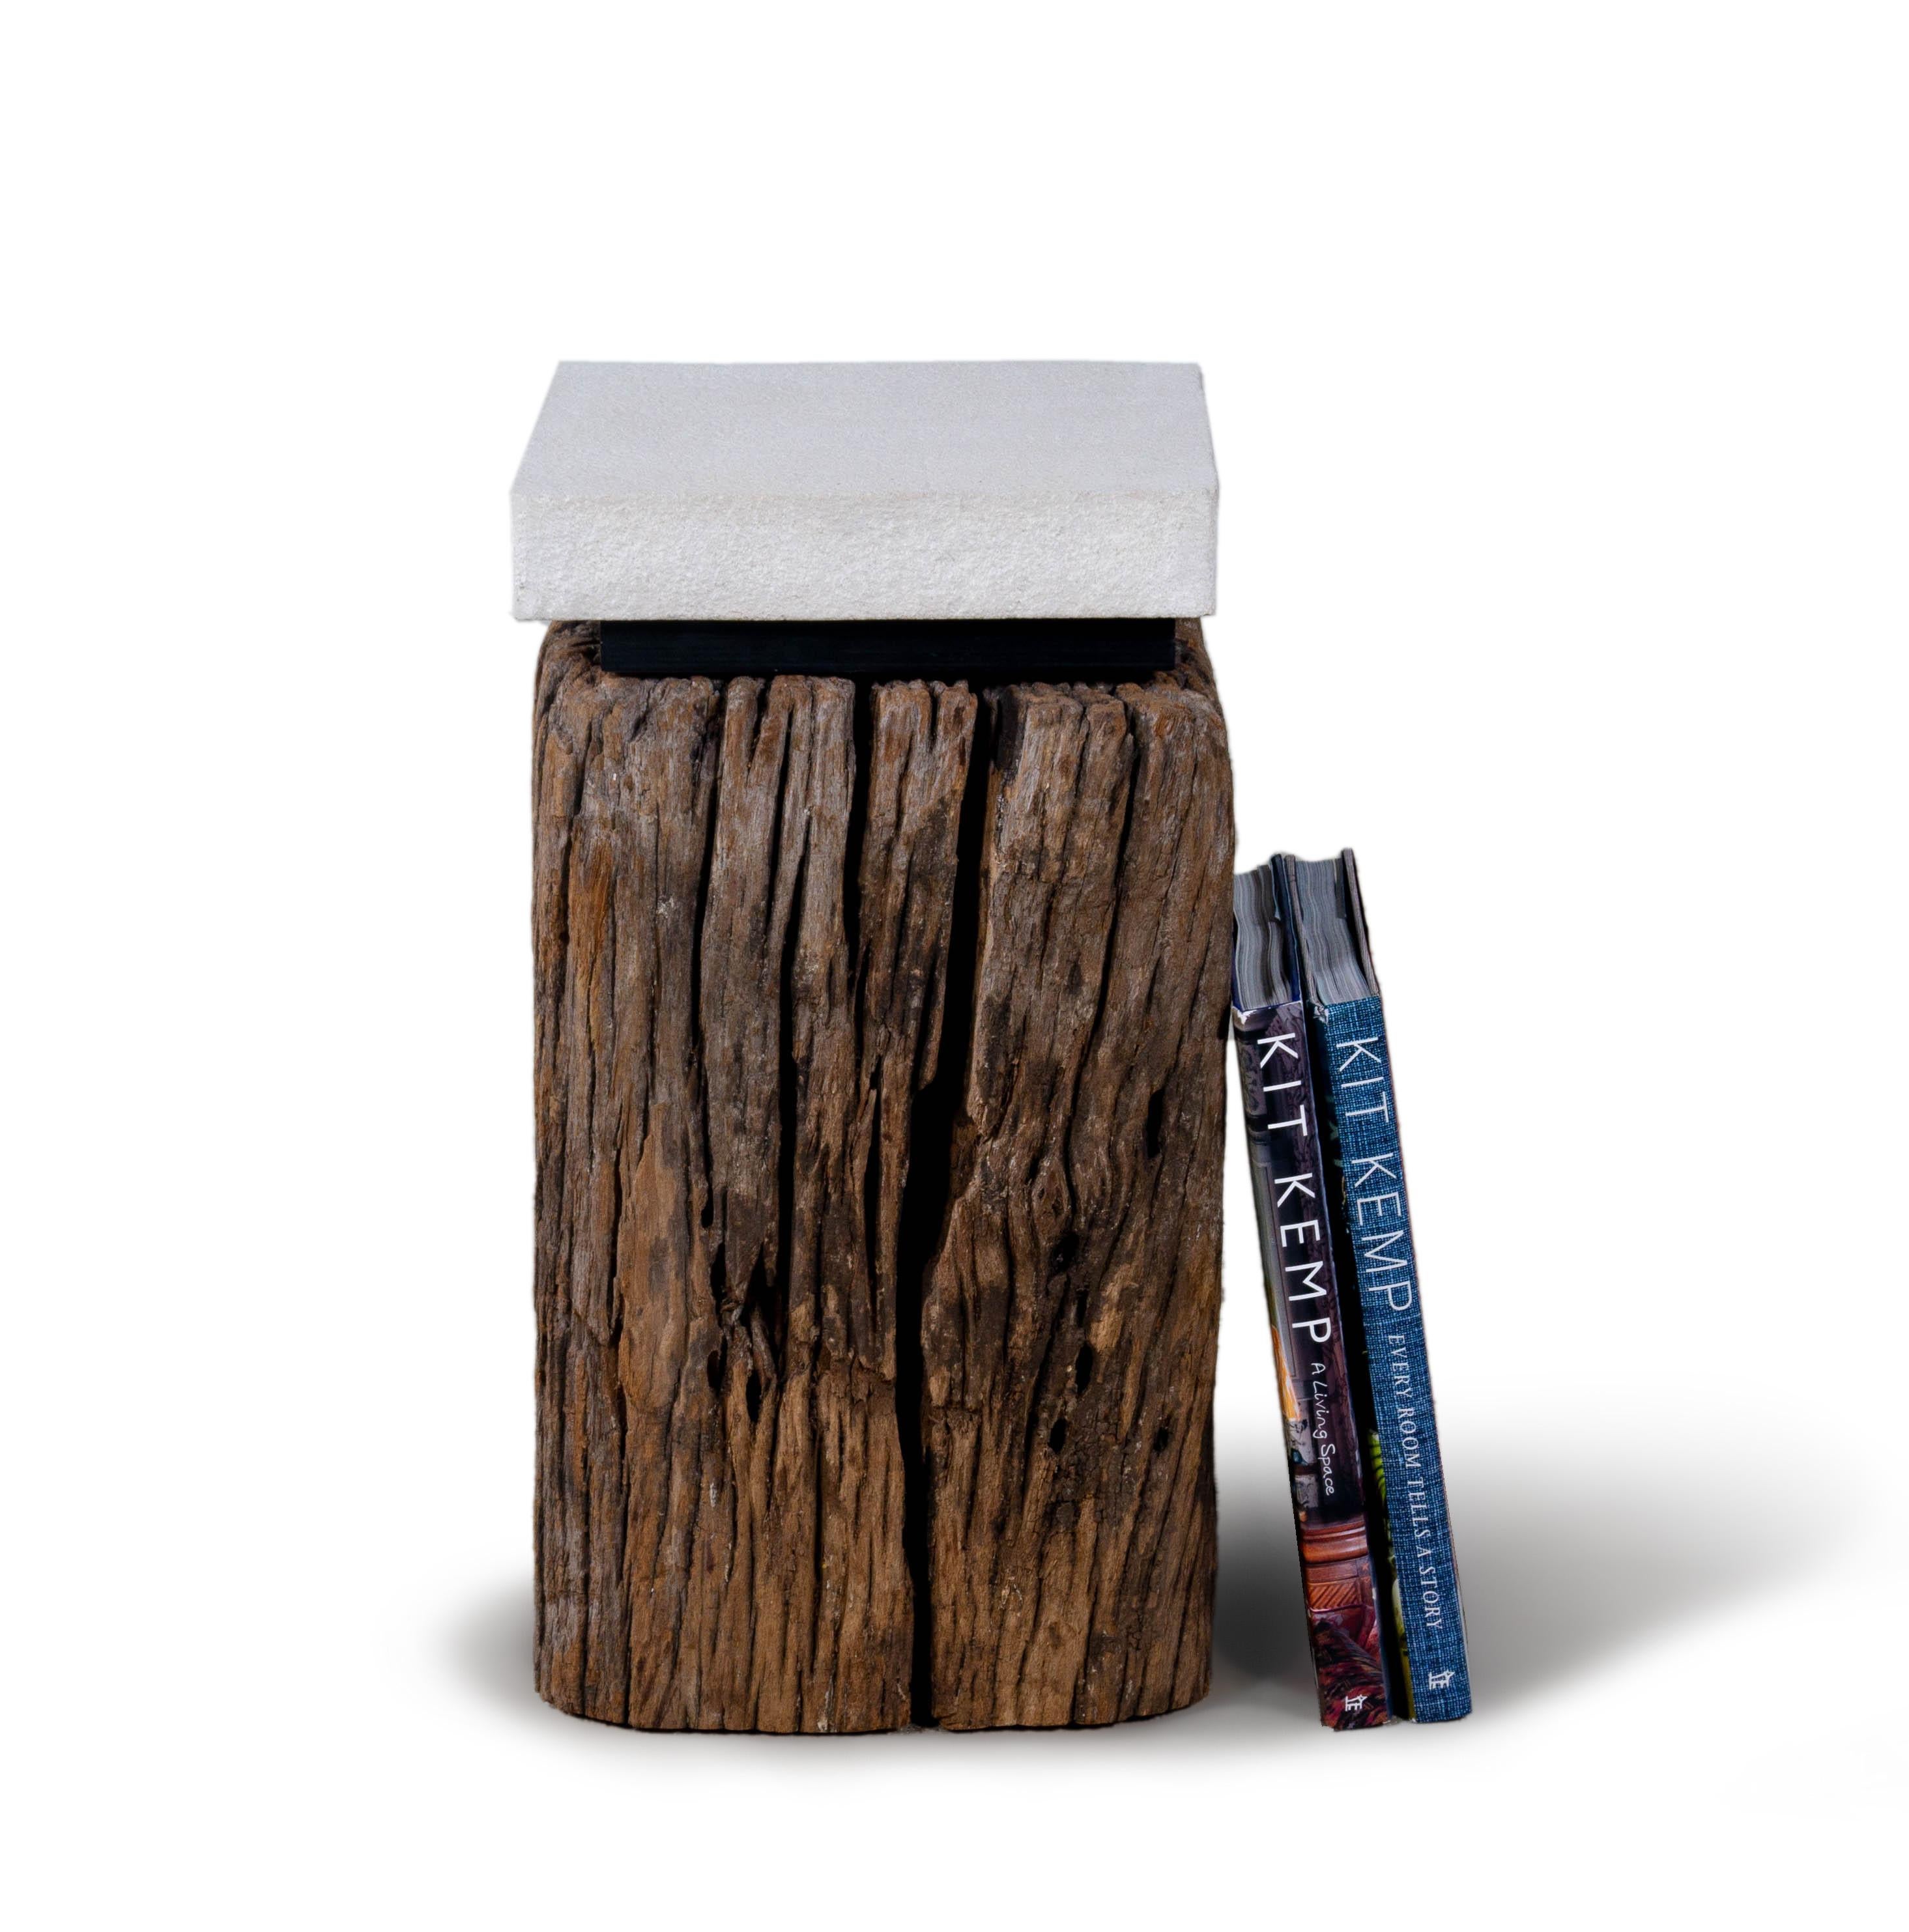 This end tables is made from a mildly weathered canal posts that features beautiful fissures that add organic texture and interest to any room. The wood features a rich walnut tone that marries perfectly with warm and cool color palettes. This